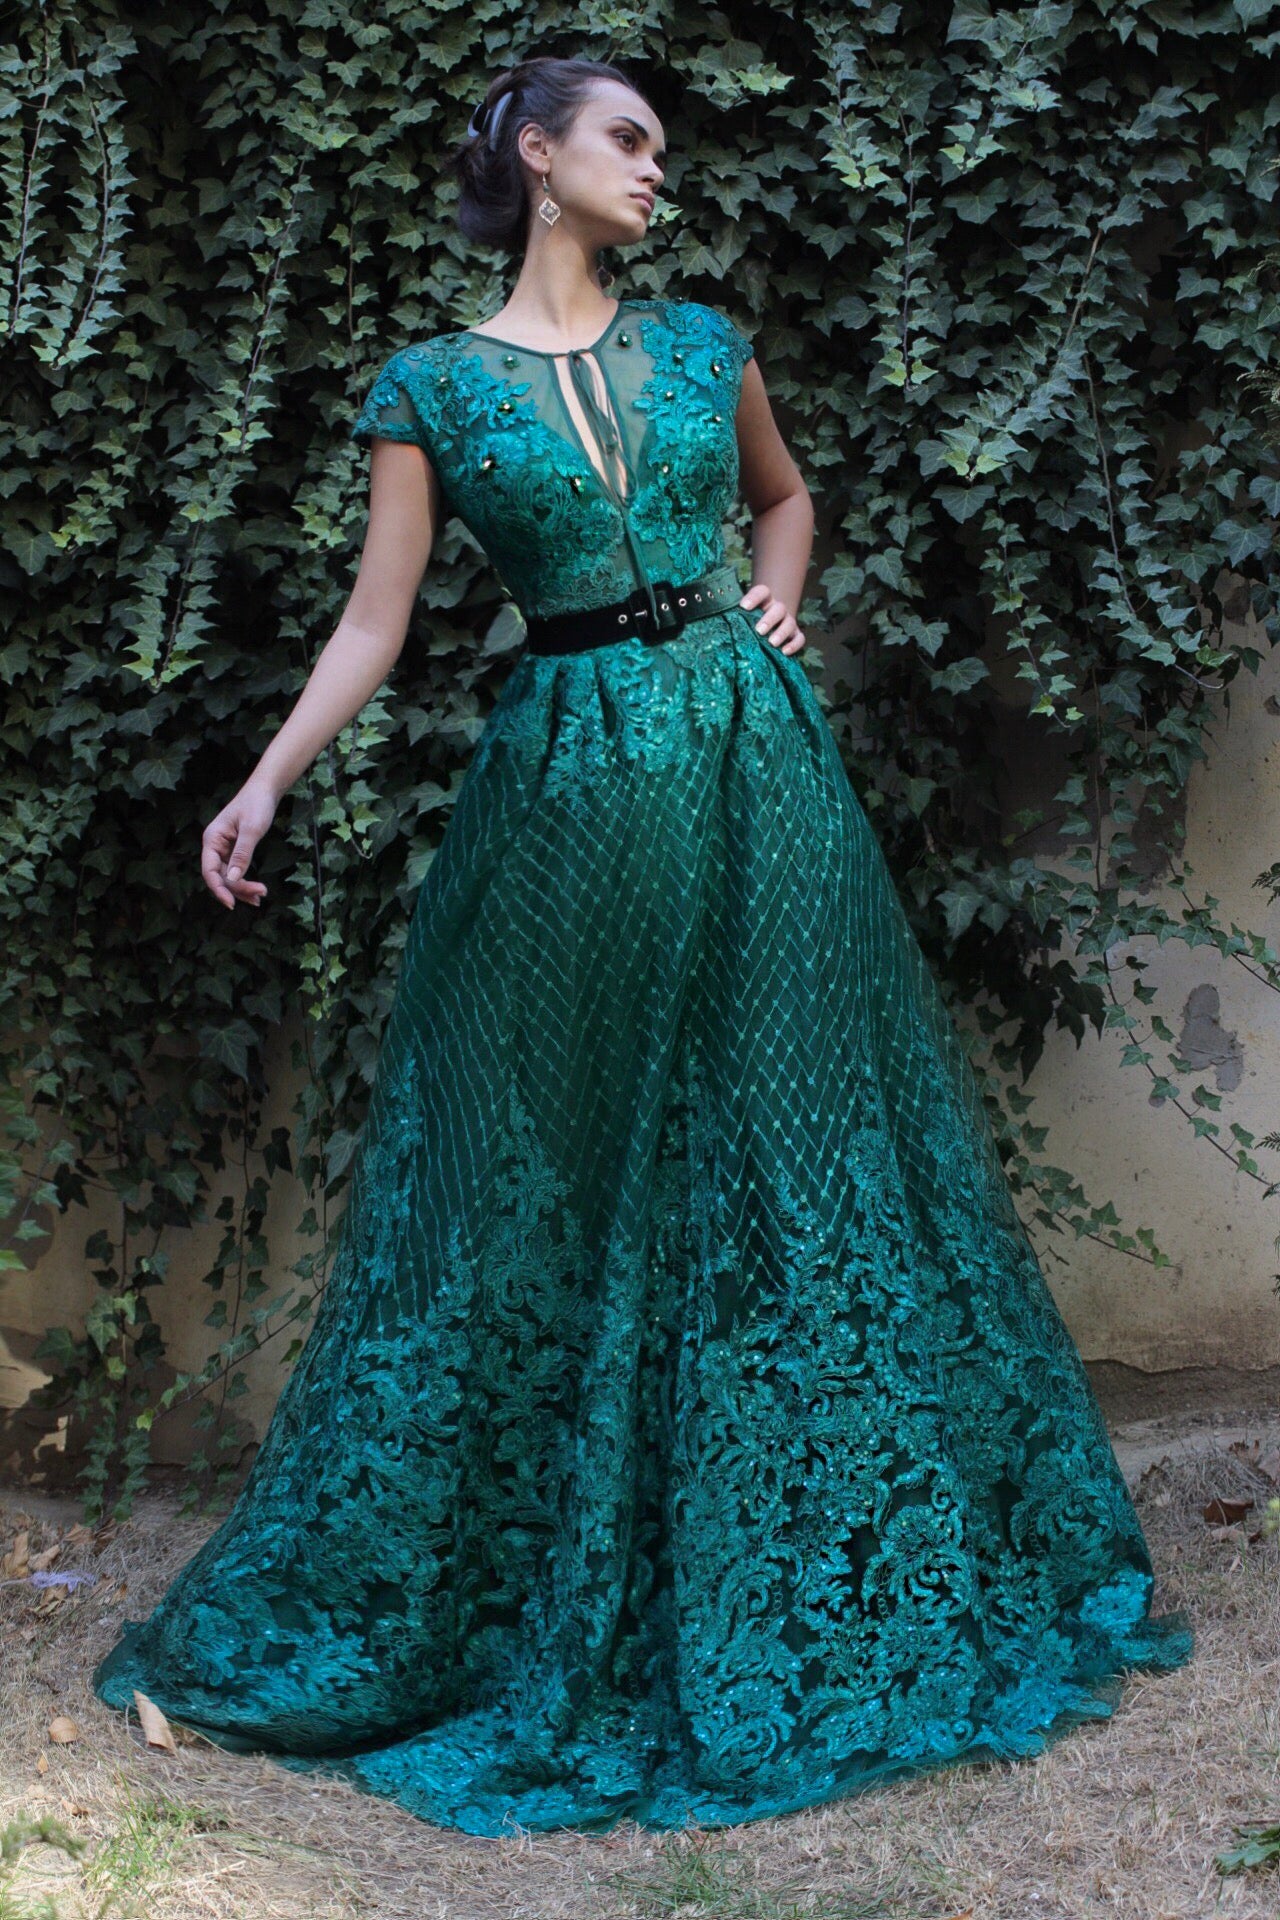 Green A-Line dress with belt, short sleeves and embroidery